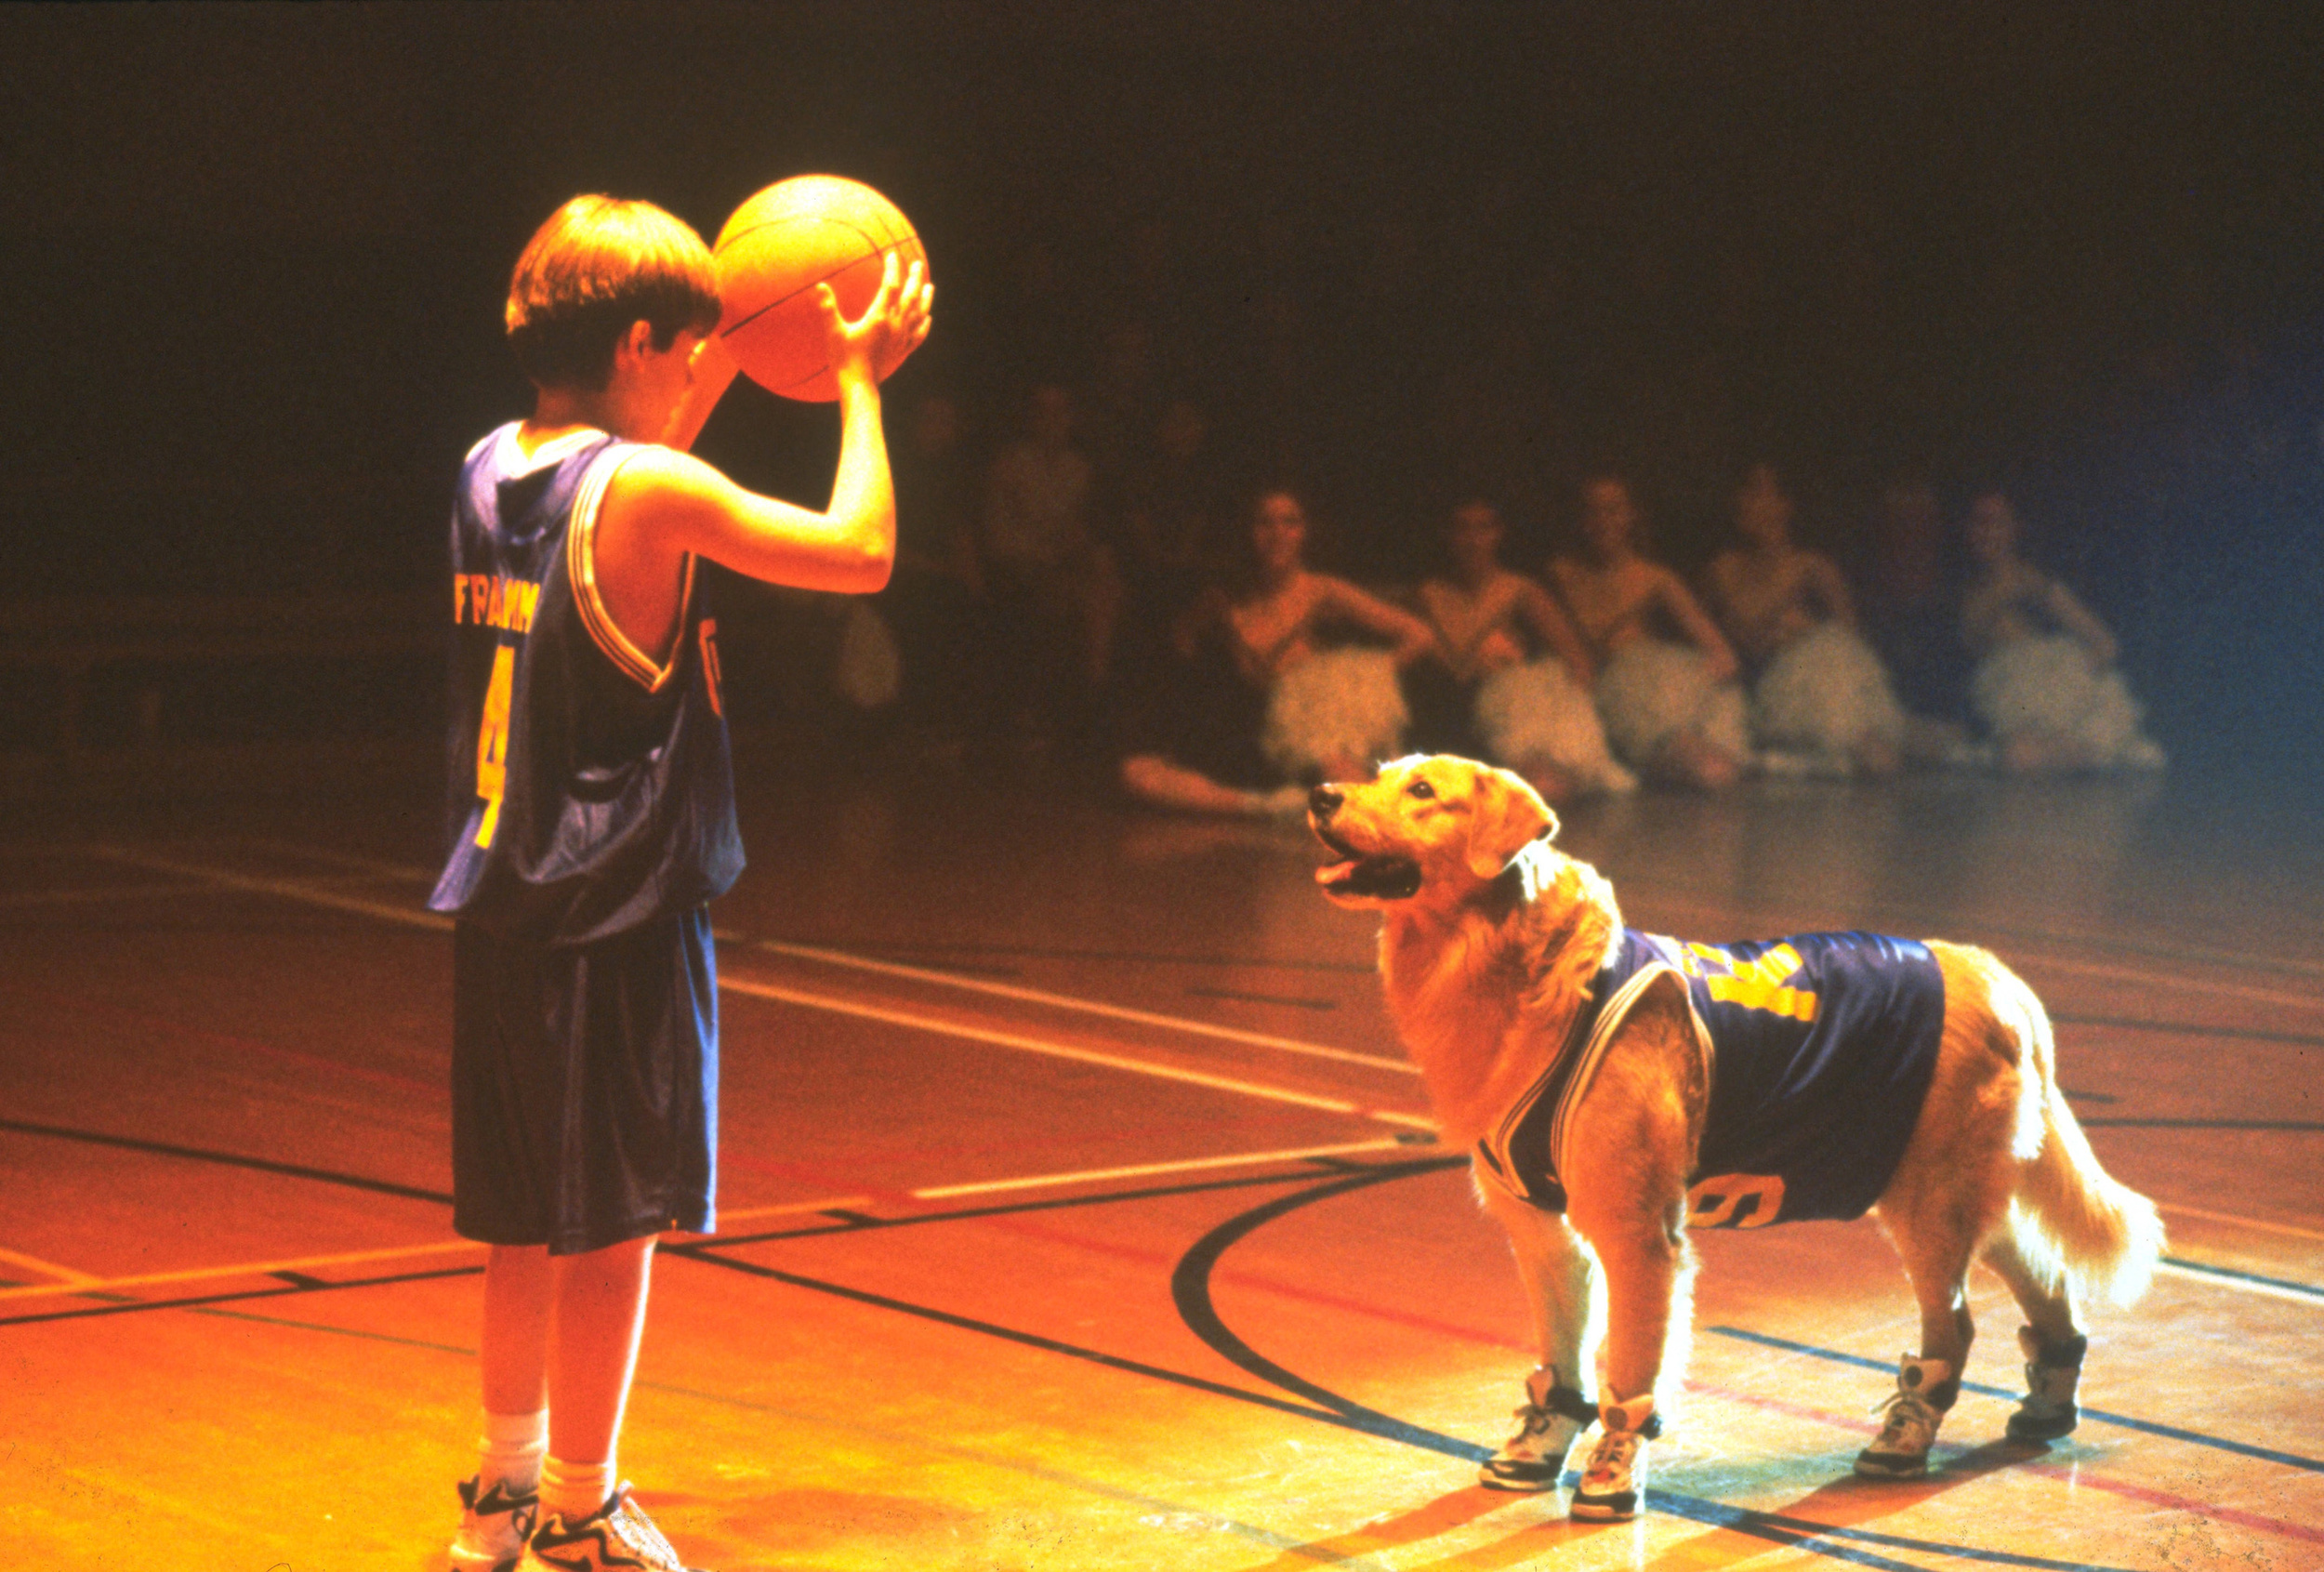 <p>One of the more-inexplicable movie series ever, “Air Bud” has made an impact on pop culture we cannot deny. This film about a dog that plays basketball basically revitalized the “animal plays sports” genre. It introduced a whole new generation to the “There’s nothing in the rulebook!” trope. Thanks, “Air Bud.”</p><p><a href='https://www.msn.com/en-us/community/channel/vid-cj9pqbr0vn9in2b6ddcd8sfgpfq6x6utp44fssrv6mc2gtybw0us'>Follow us on MSN to see more of our exclusive entertainment content.</a></p>